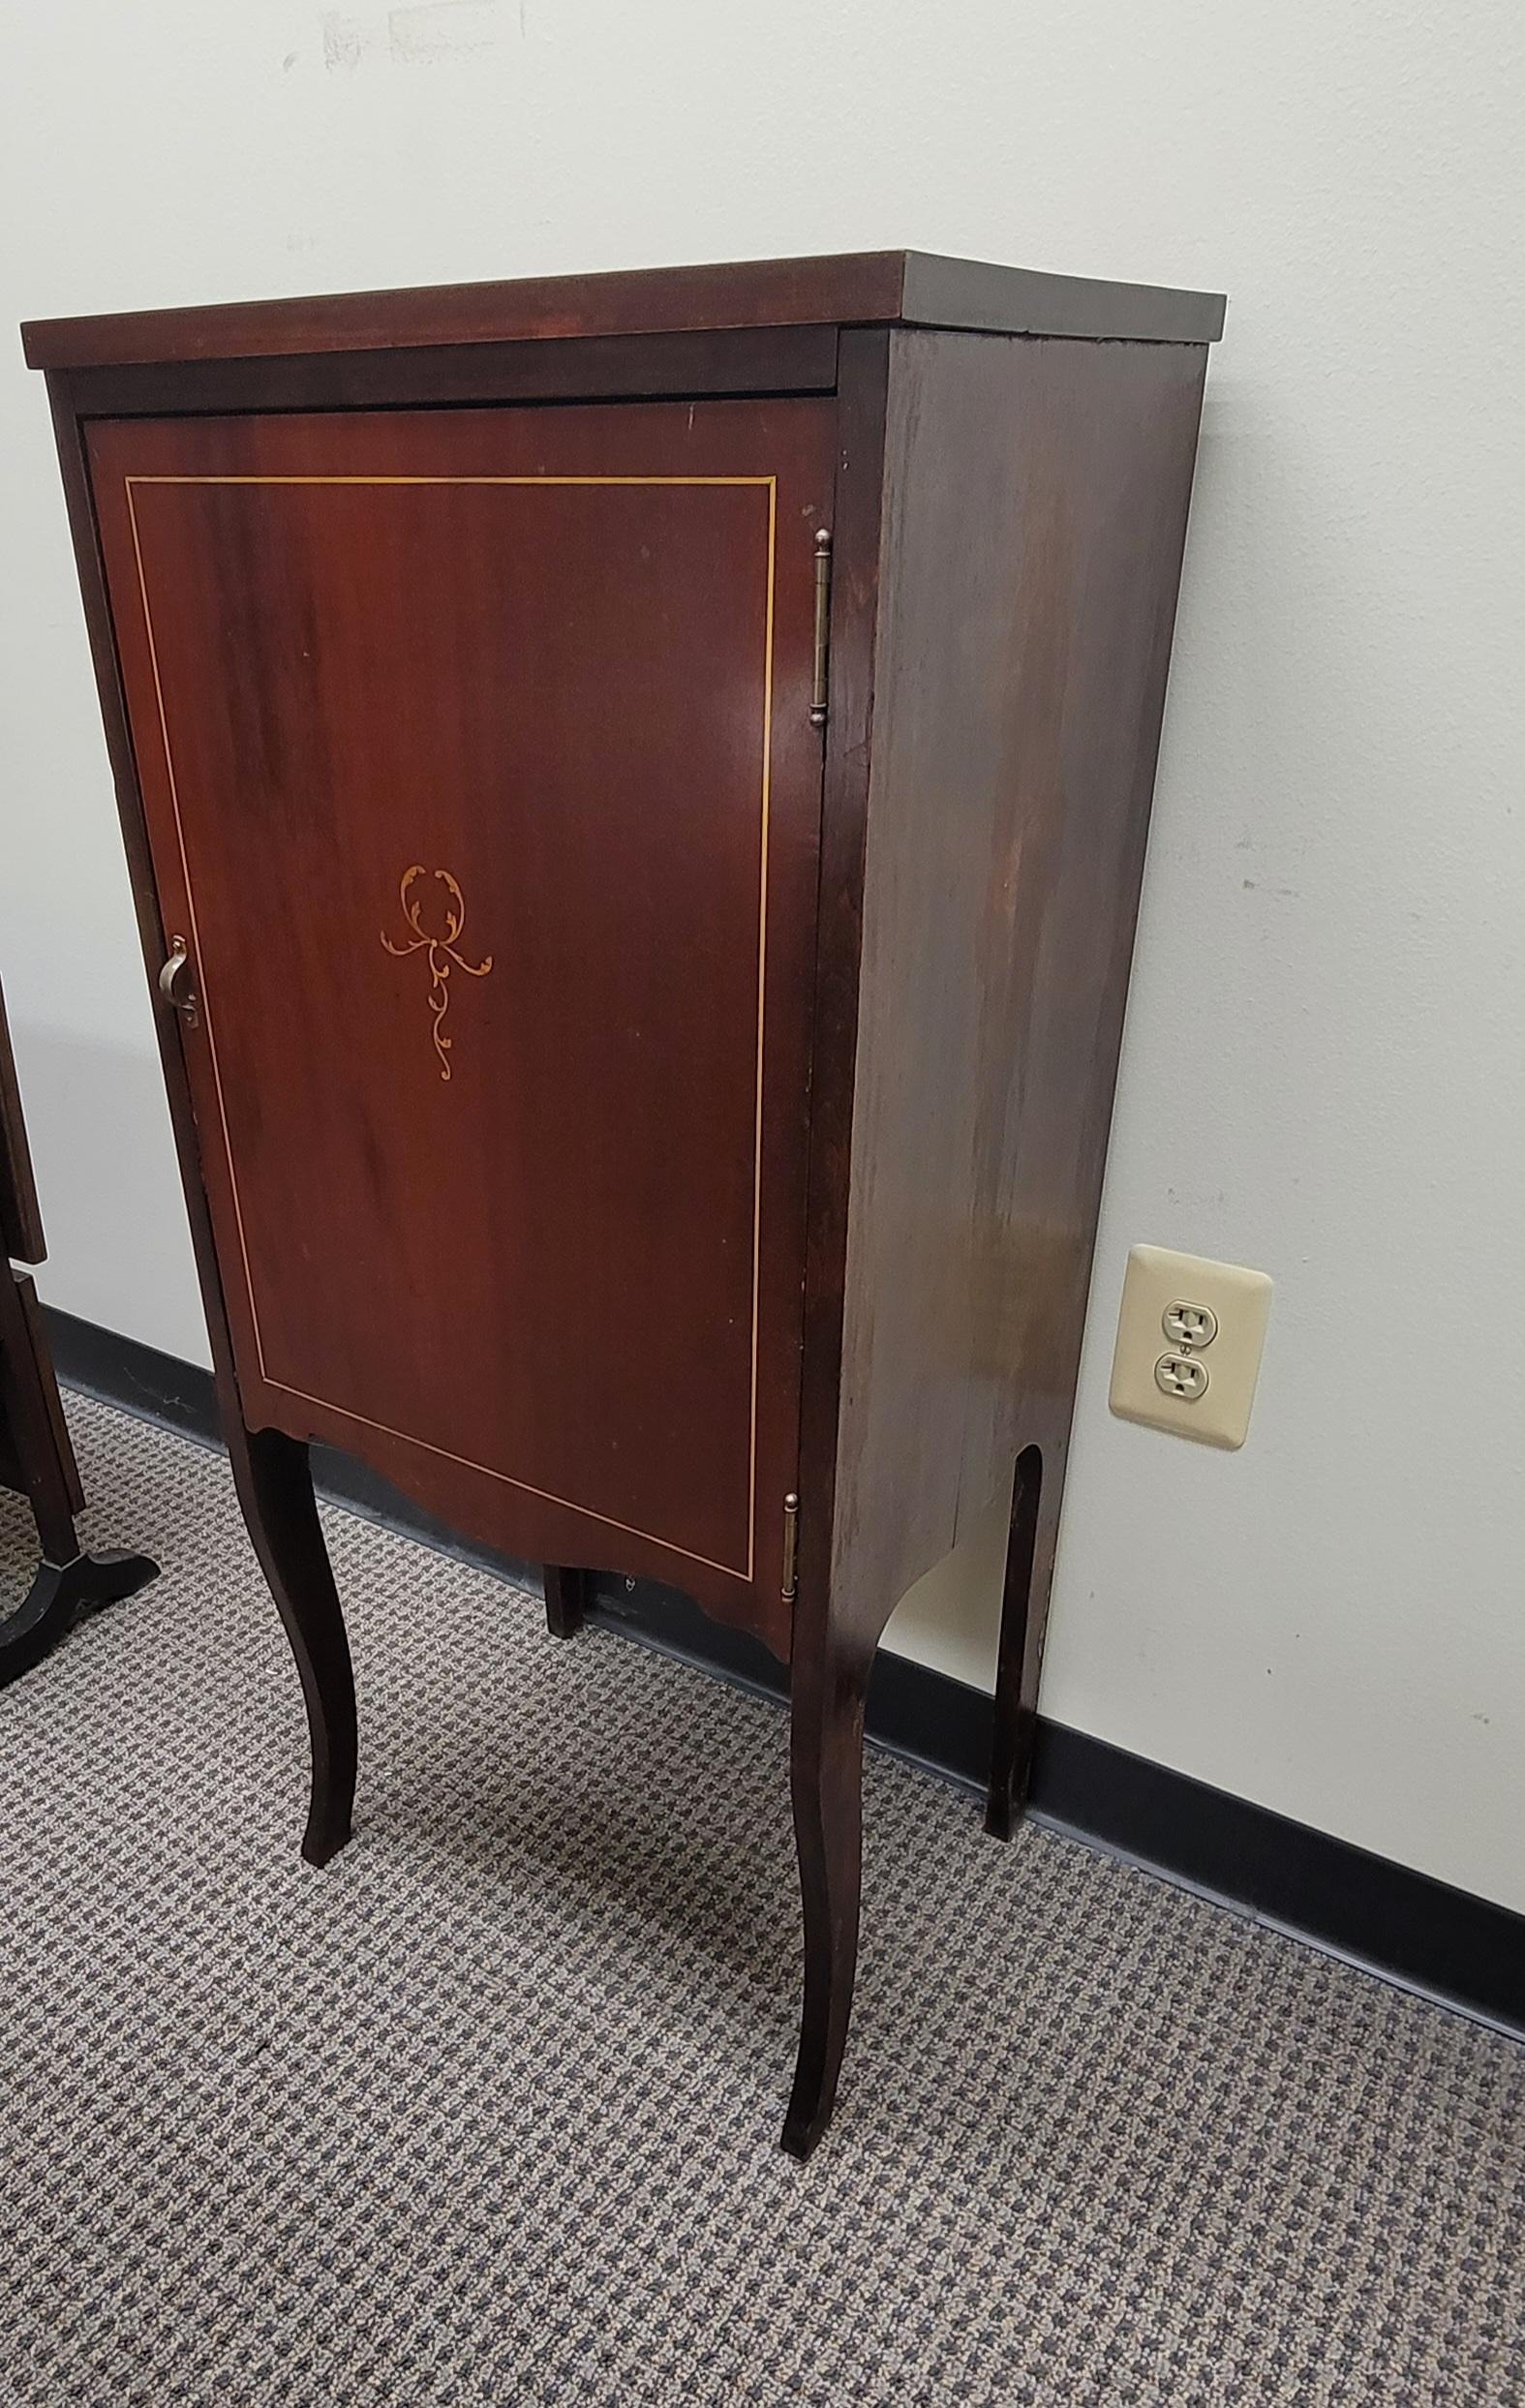 Early 20th C. Edwardian Mahogany Marquetry Satinwood Inlaid Sheet Music Cabinet In Good Condition For Sale In Germantown, MD